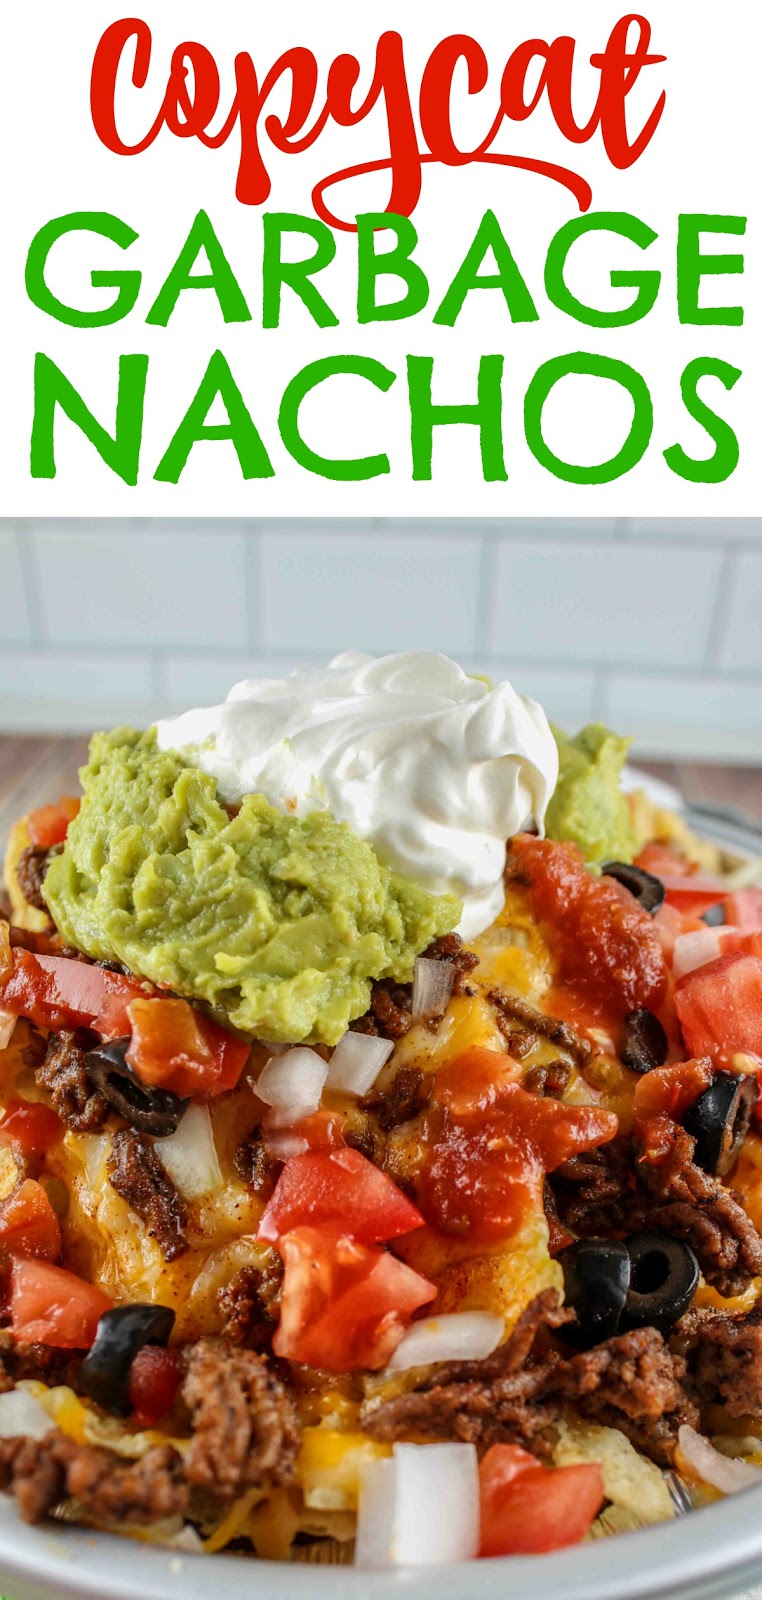 When I visited Gulf Shores and Orange Beach - one place I loved was Tacky Jacks! These Garbage Nachos were so fun and so delicious!  had to make them myself! They could also be called Kitchen Sink nachos because they've got everything! 